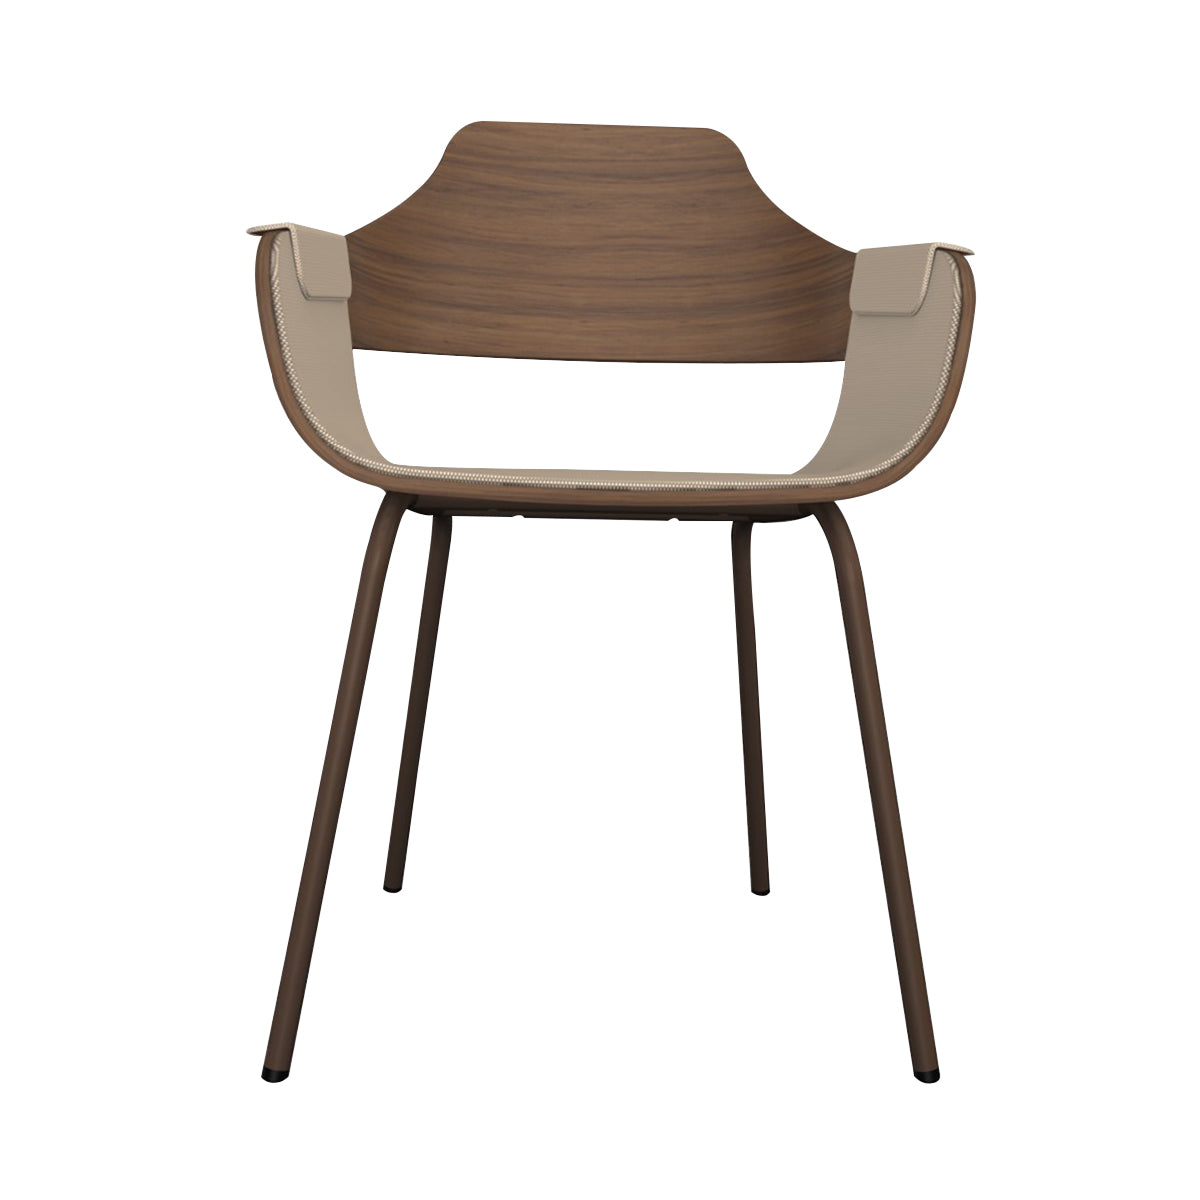 Showtime Chair with Metal Base: Interior Seat + Armrest Upholstered + Pale Brown